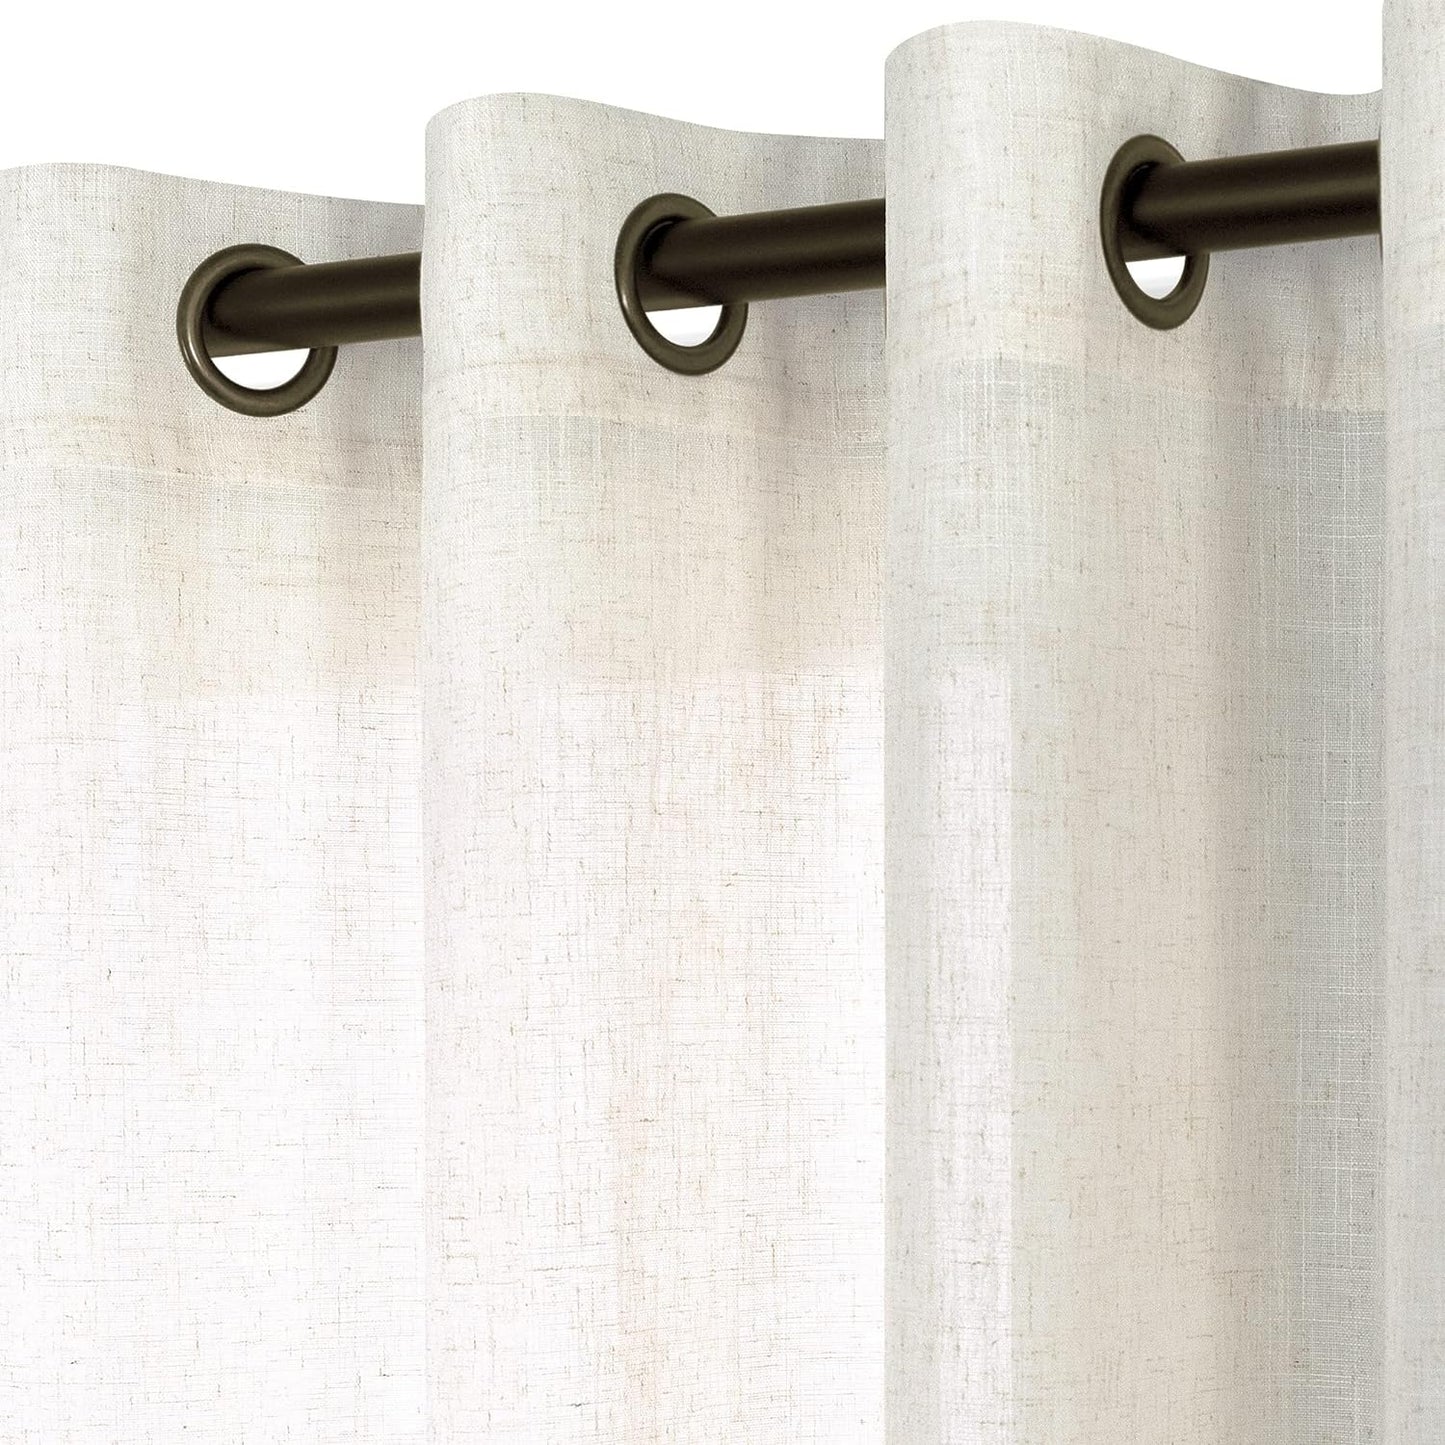 KOUFALL Beige Rustic Country Curtains for Living Room 84 Inches Long Flax Linen Bronze Grommet Tan Sand Color Solid Faux Linen Curtains for Bedroom Sliding Glass Patio Door 2 Panels  KOUFALL TEXTILE Natural 52X86 